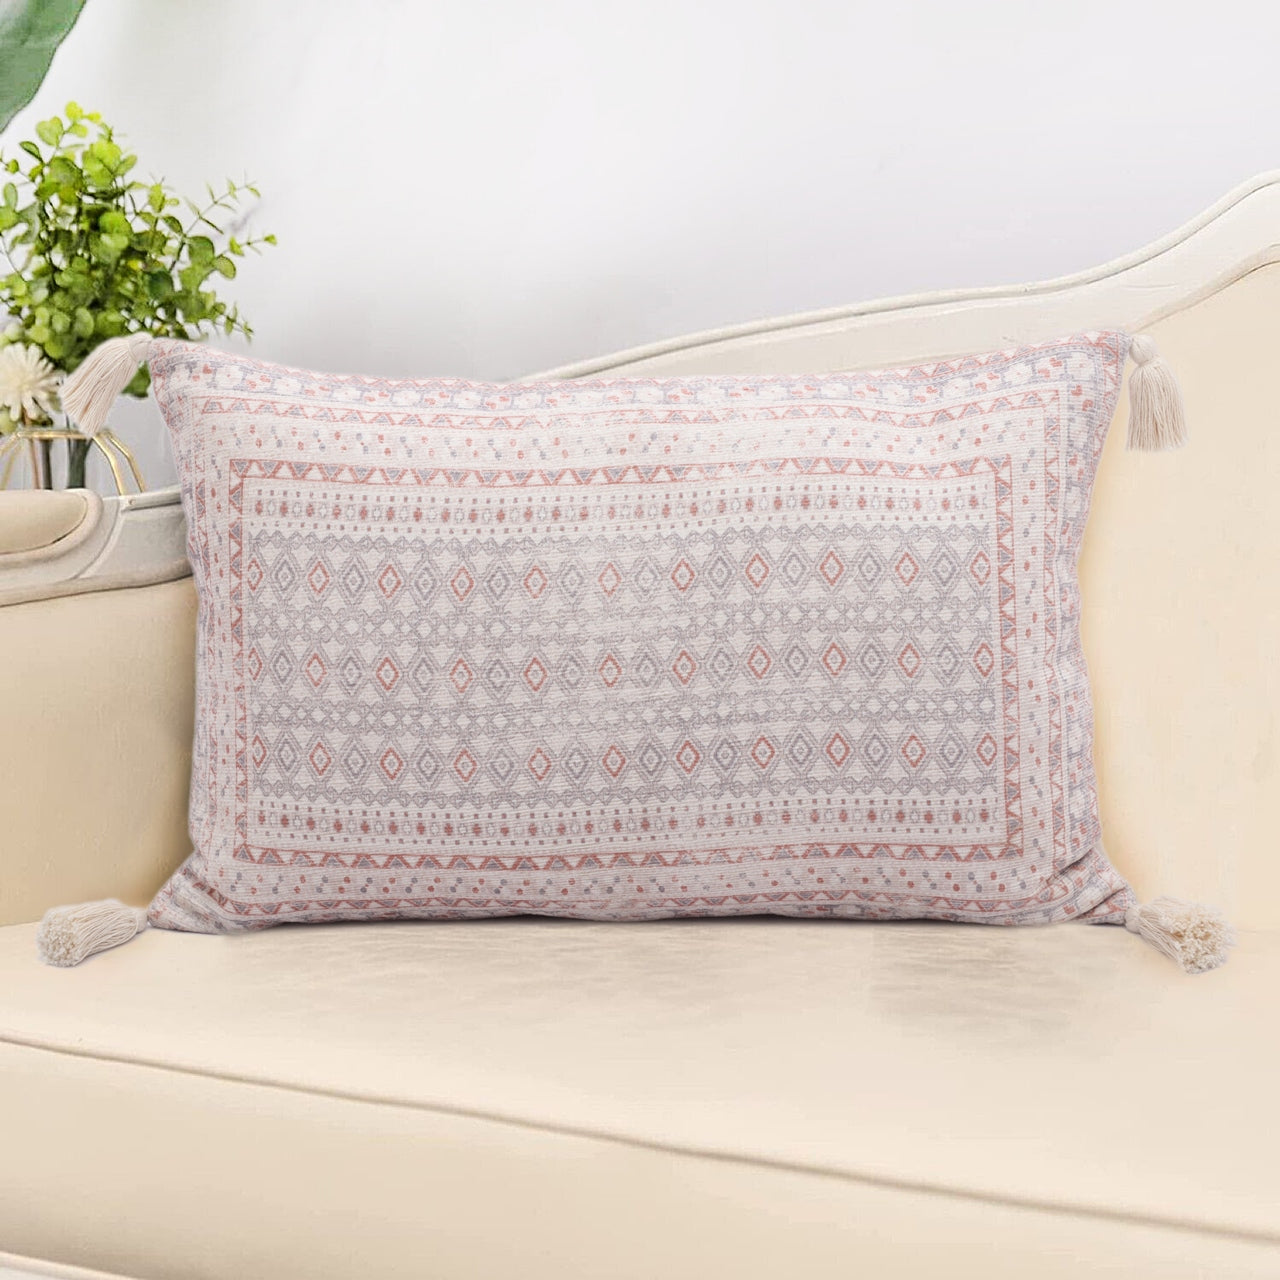 Multicolor Chenille Digital Printed Cushion Cover with Tassels